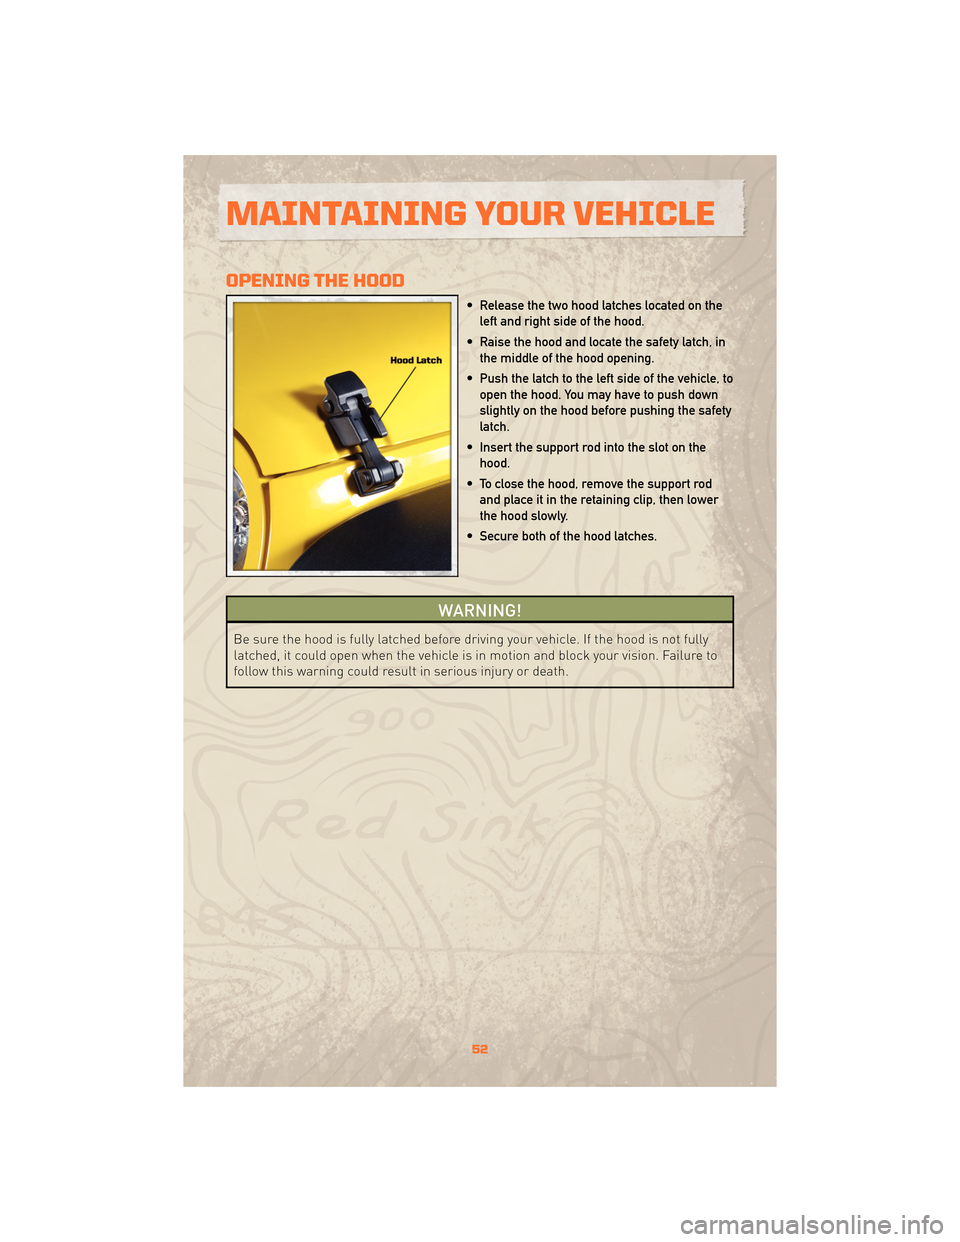 JEEP WRANGLER 2010 JK / 3.G User Guide OPENING THE HOOD
• Release the two hood latches located on theleft and right side of the hood.
• Raise the hood and locate the safety latch, in the middle of the hood opening.
• Push the latch t